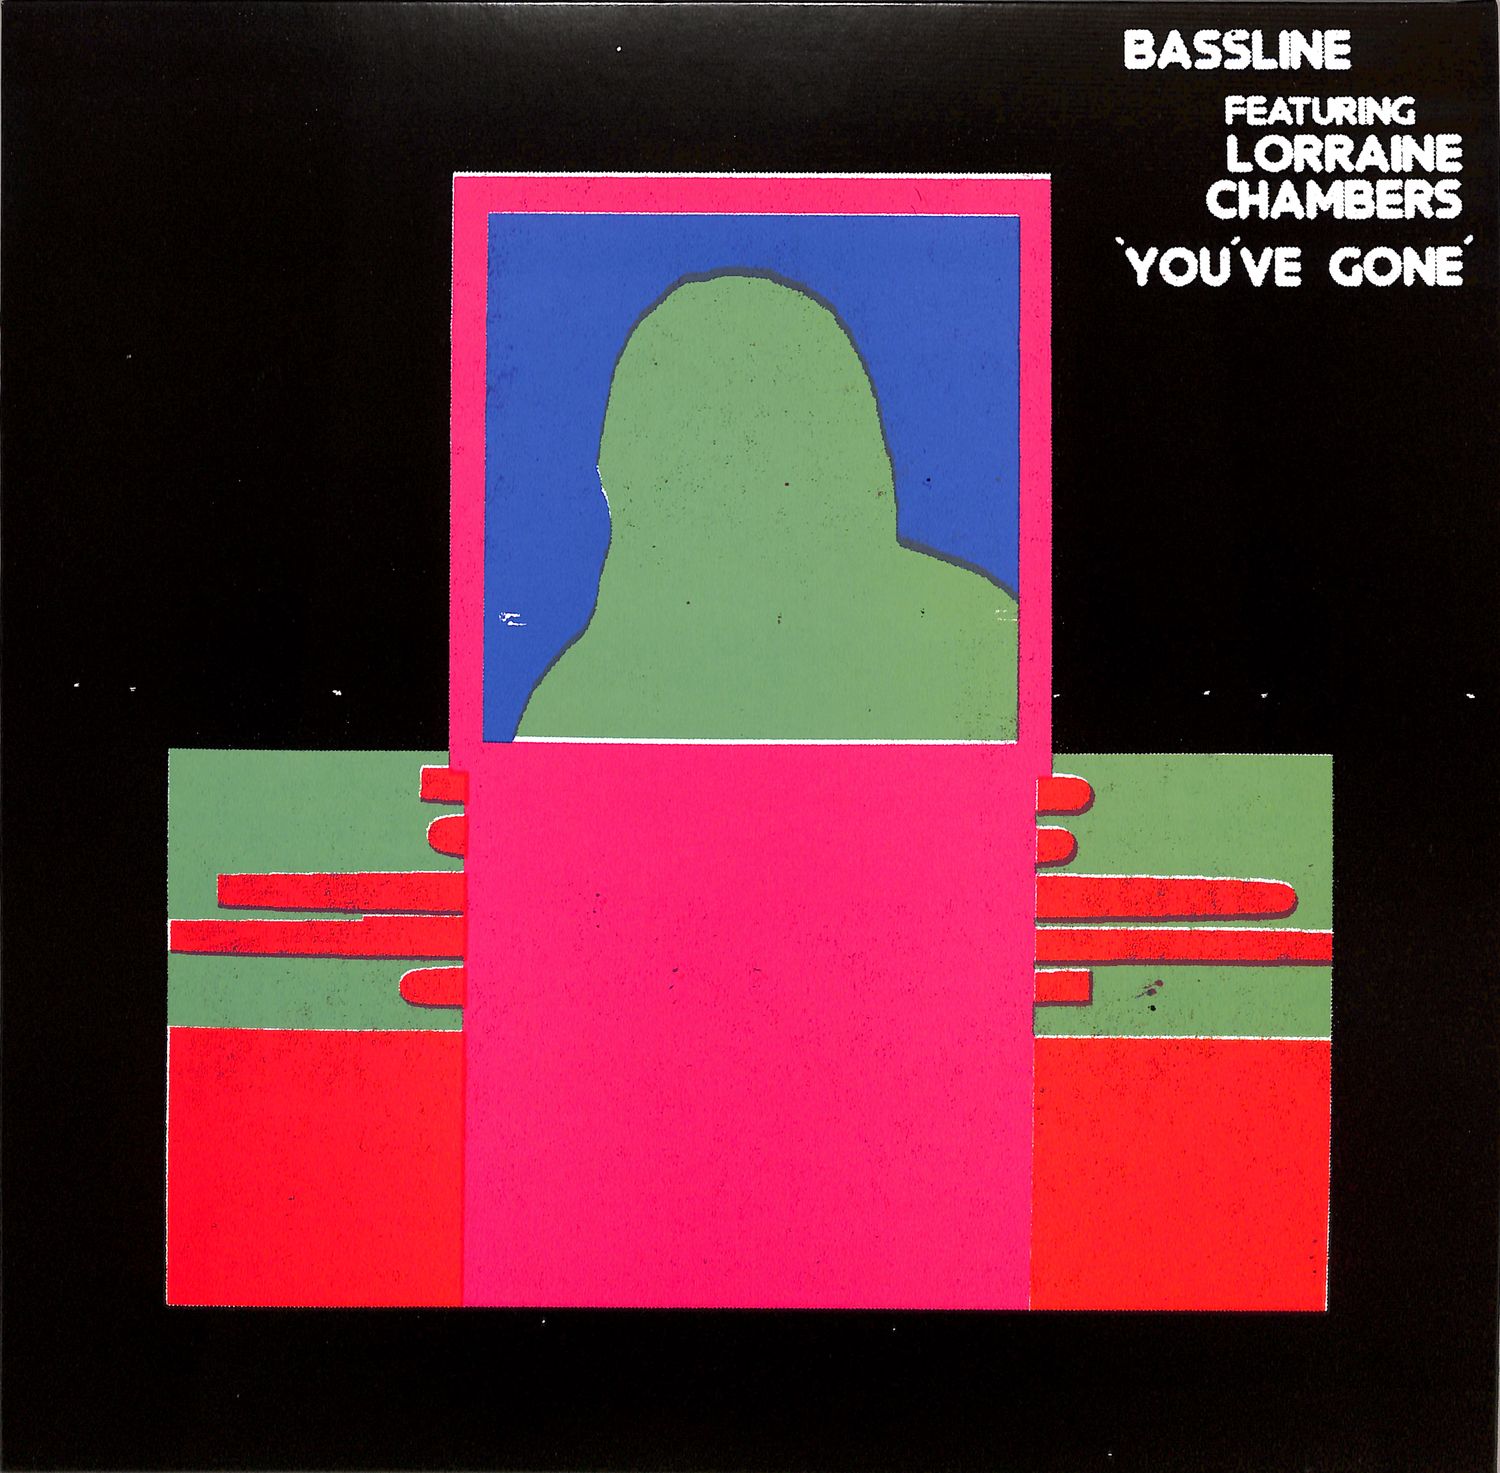 Bassline featuring Lorraine Chambers - YOUVE GONE